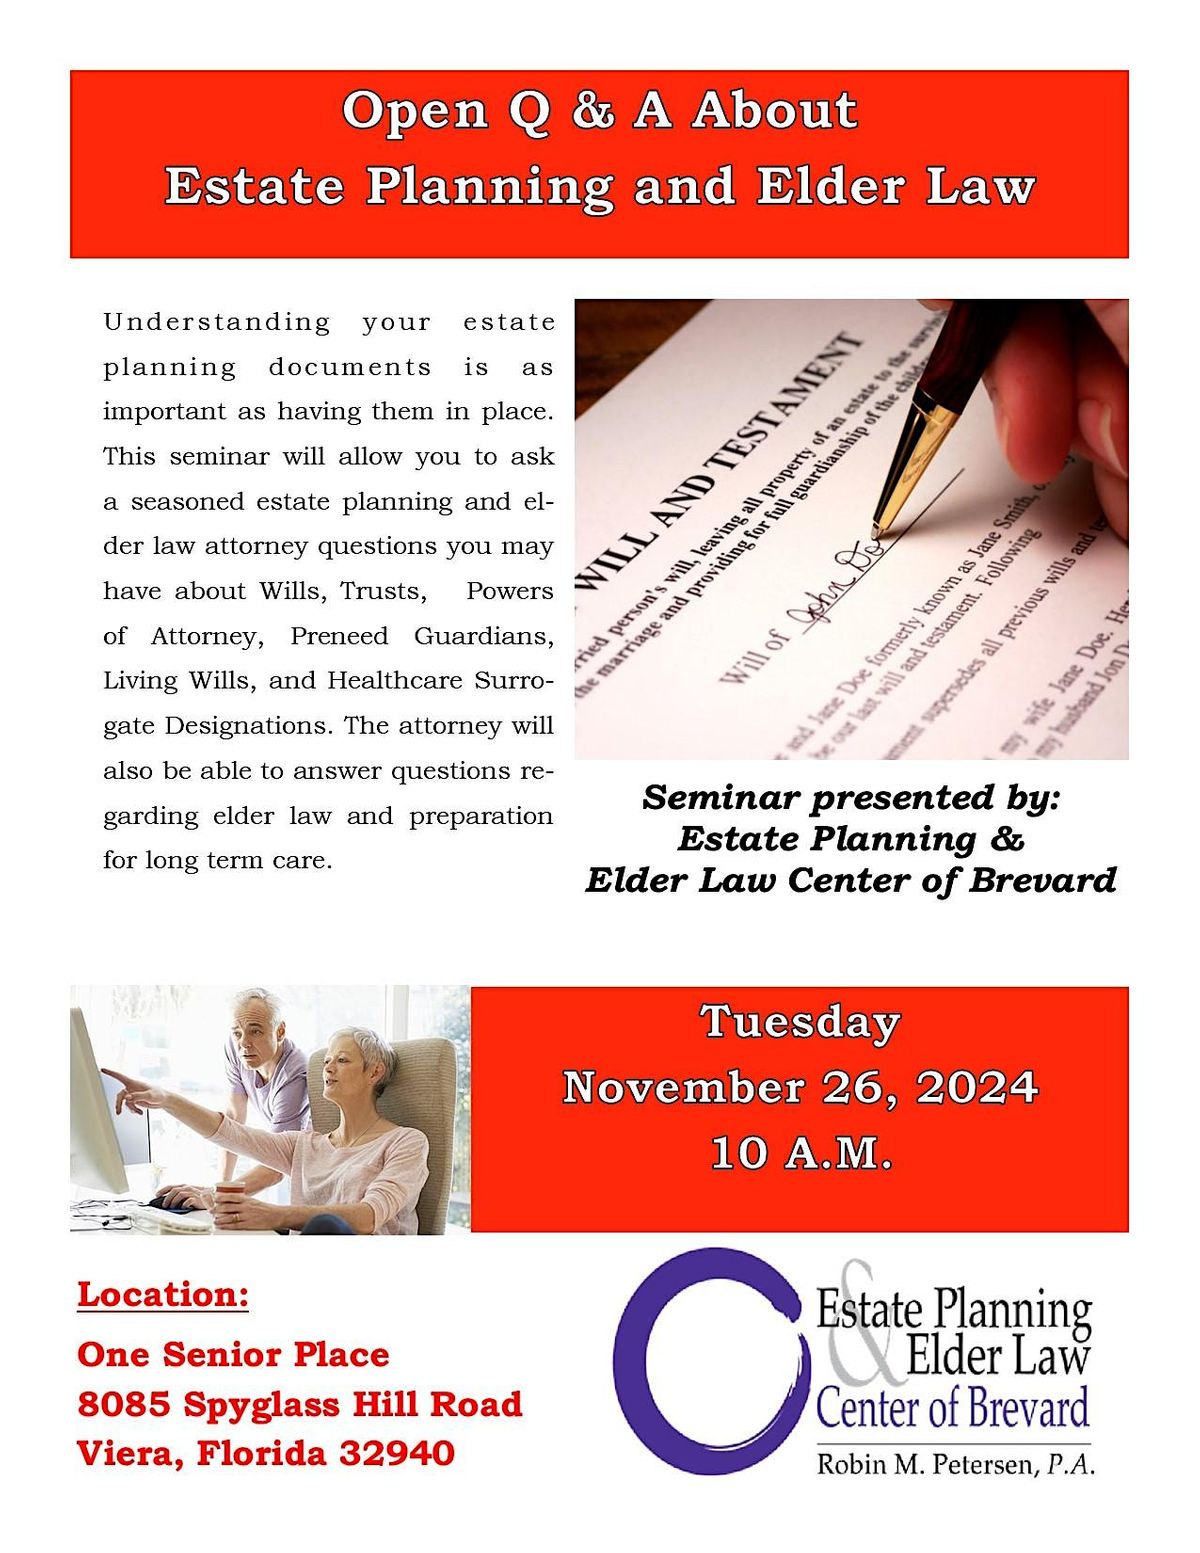 Open Q&A About Estate Planning And Elder Law